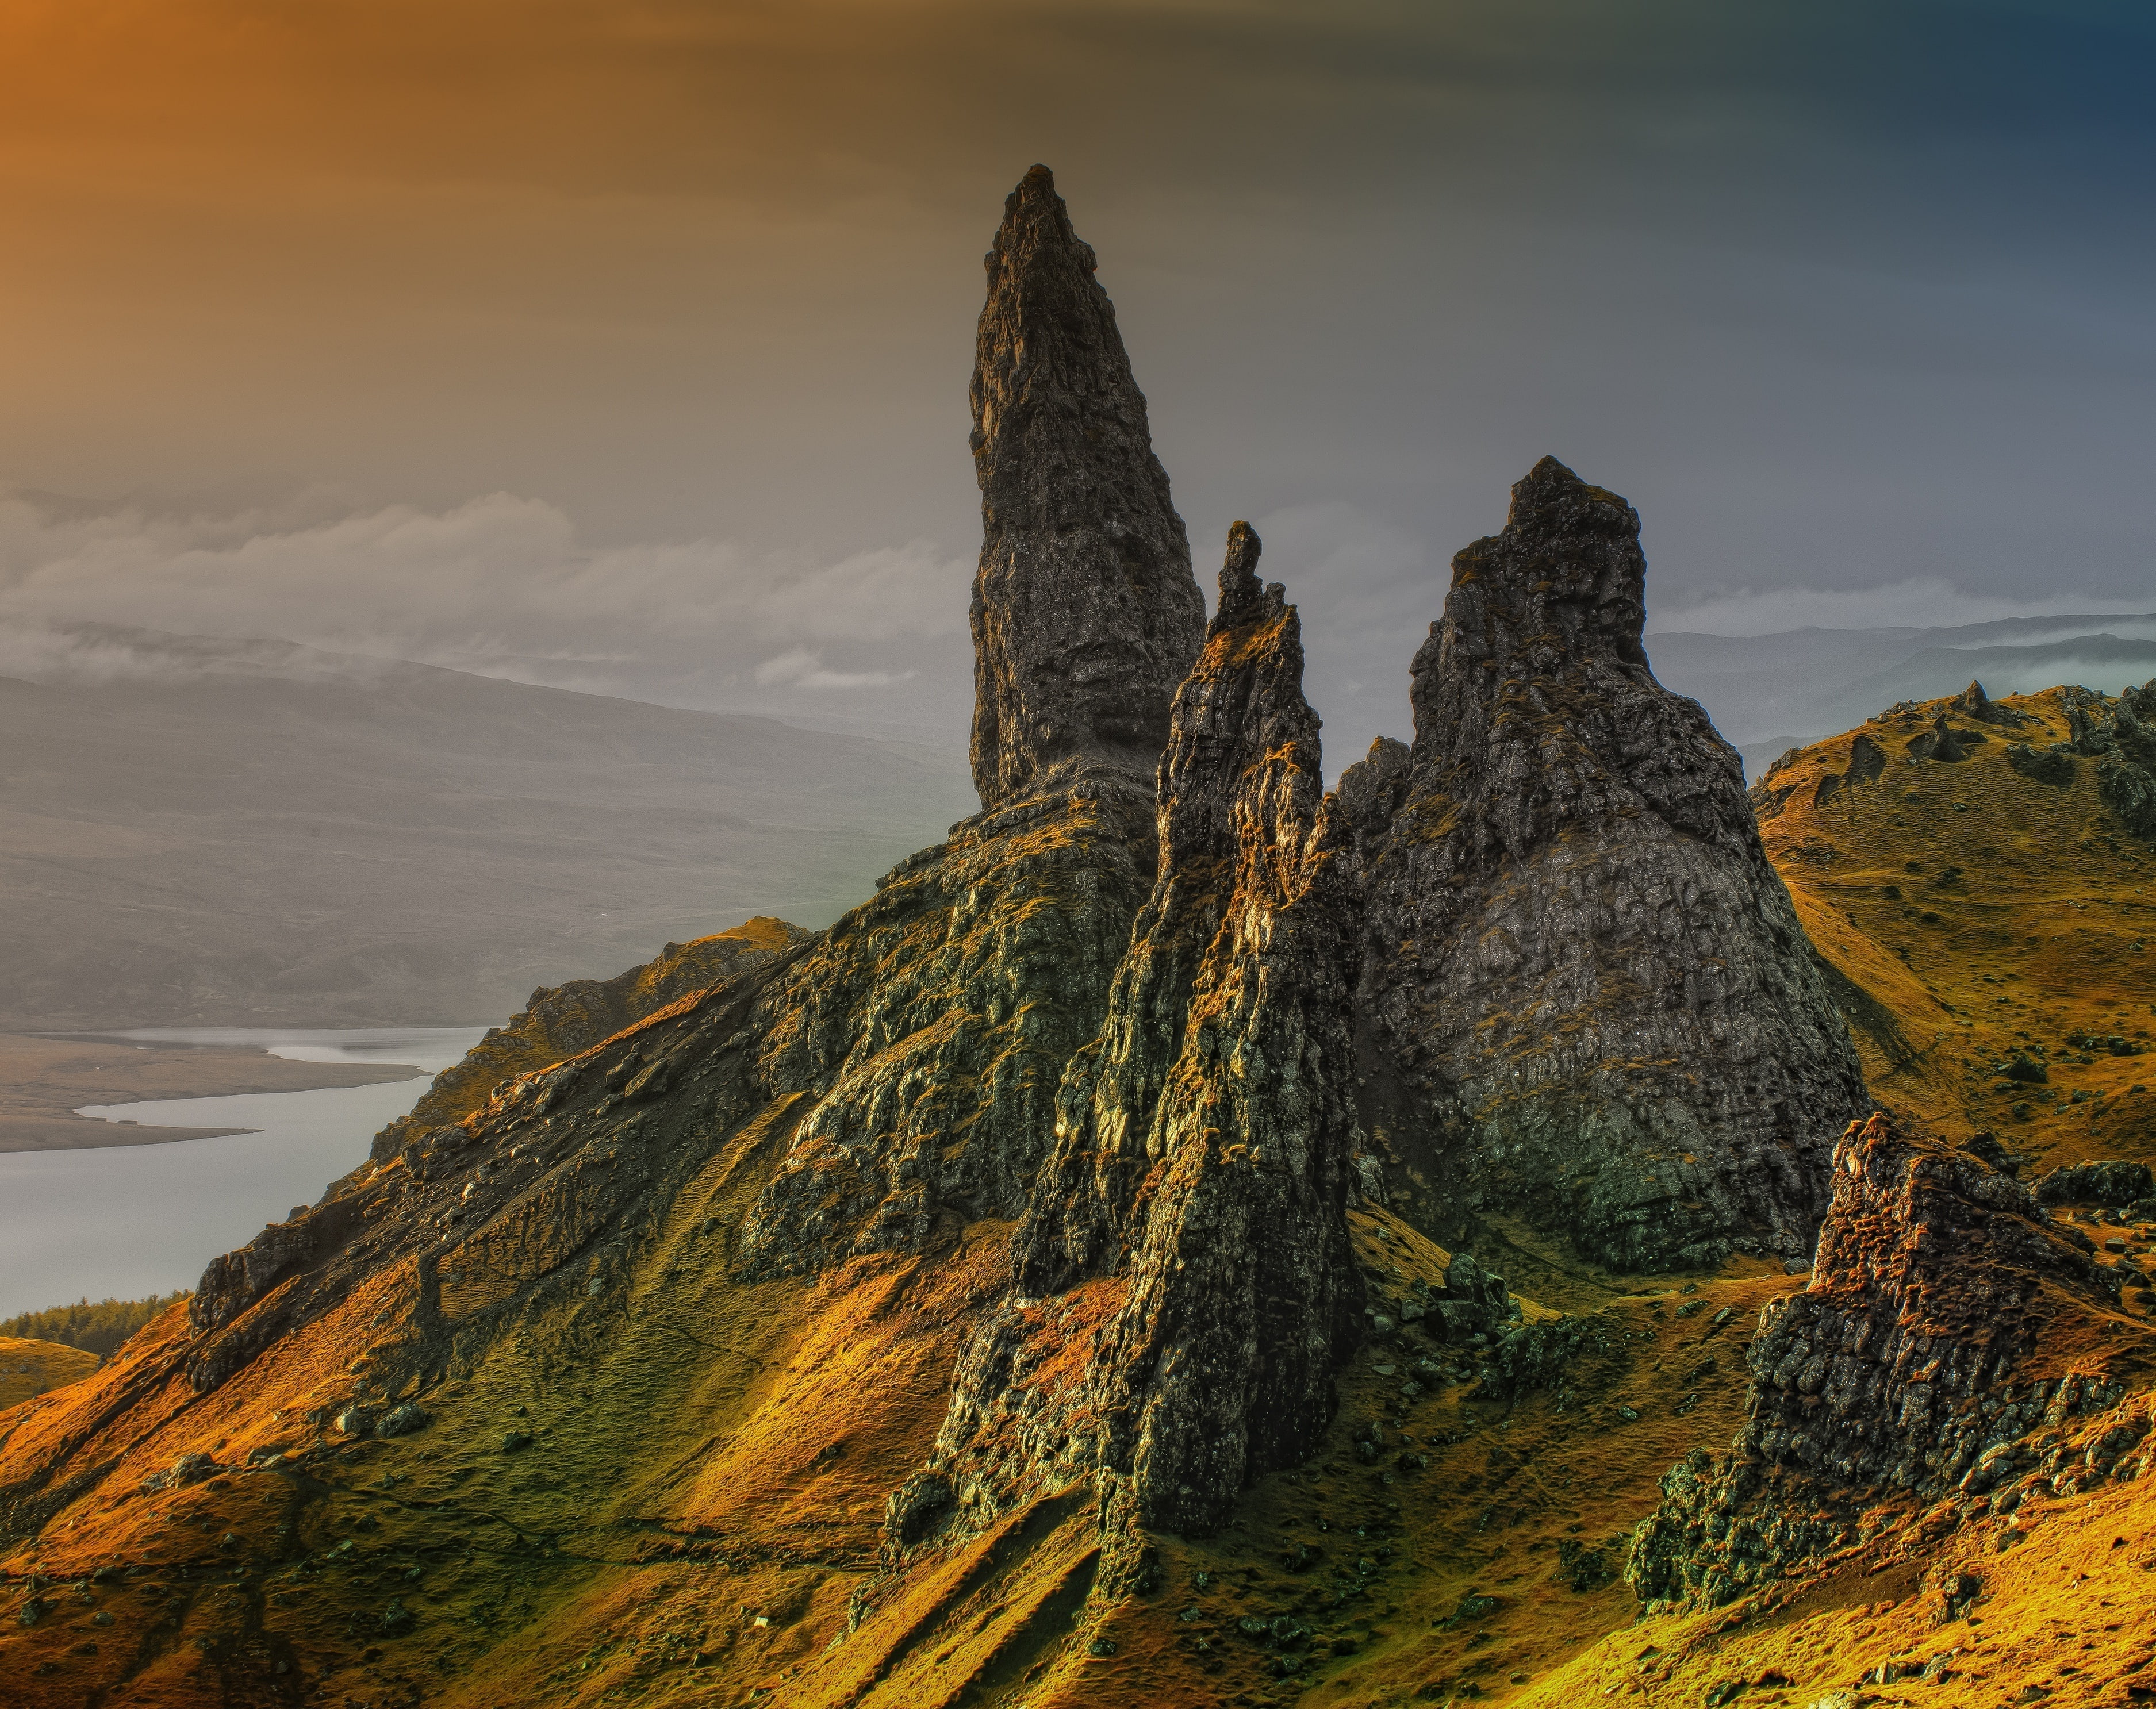 The Storr Hill, Scotland, gray mountain rock formation, Europe